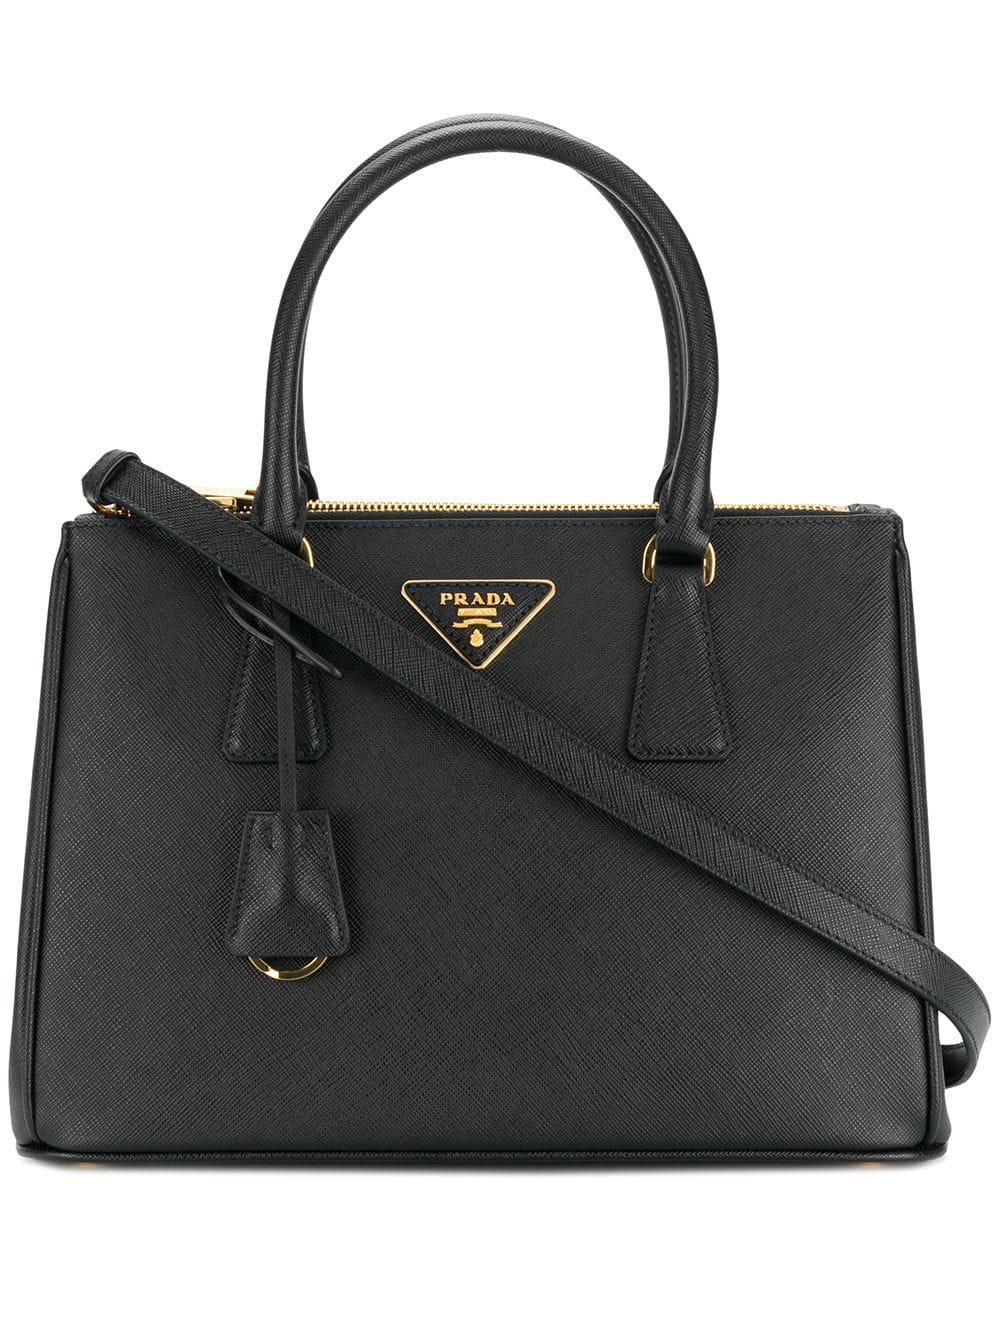 Prada Leather Bibliotheque Large Tote Bag in Nero (Black) - Save 49% - Lyst